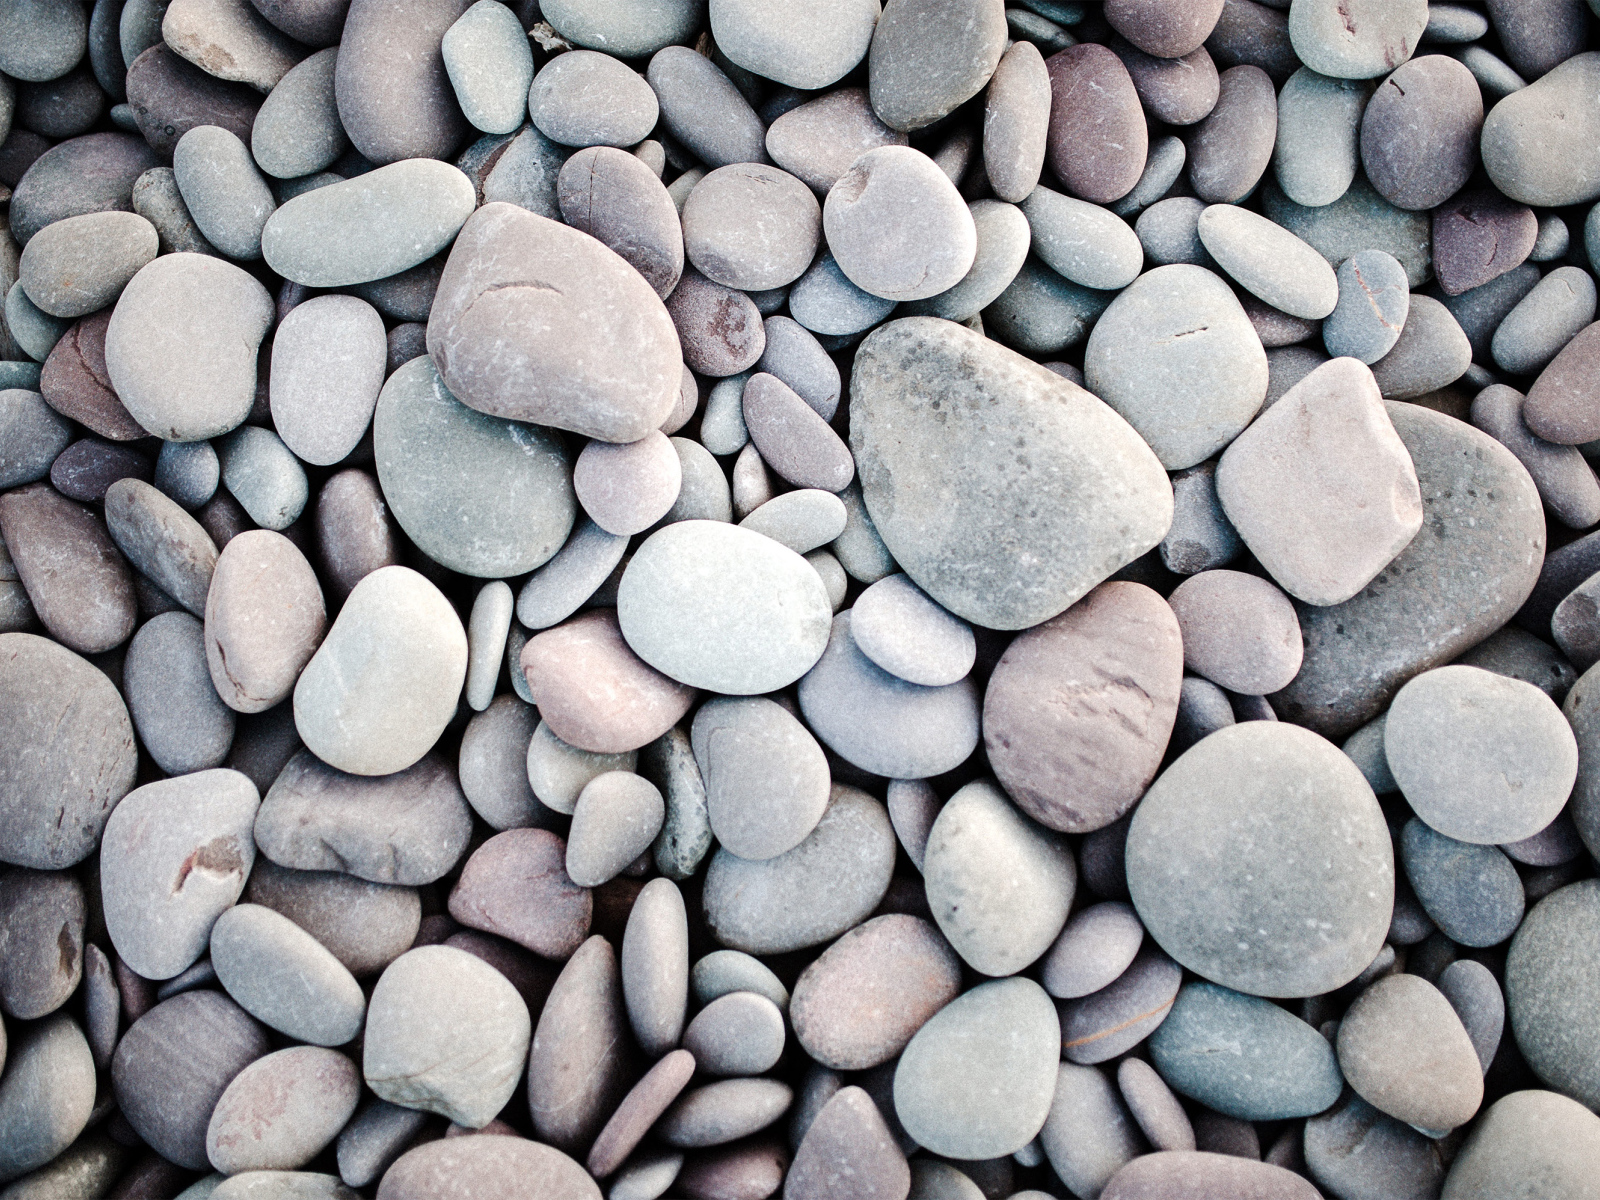 Many gray stones of different shapes